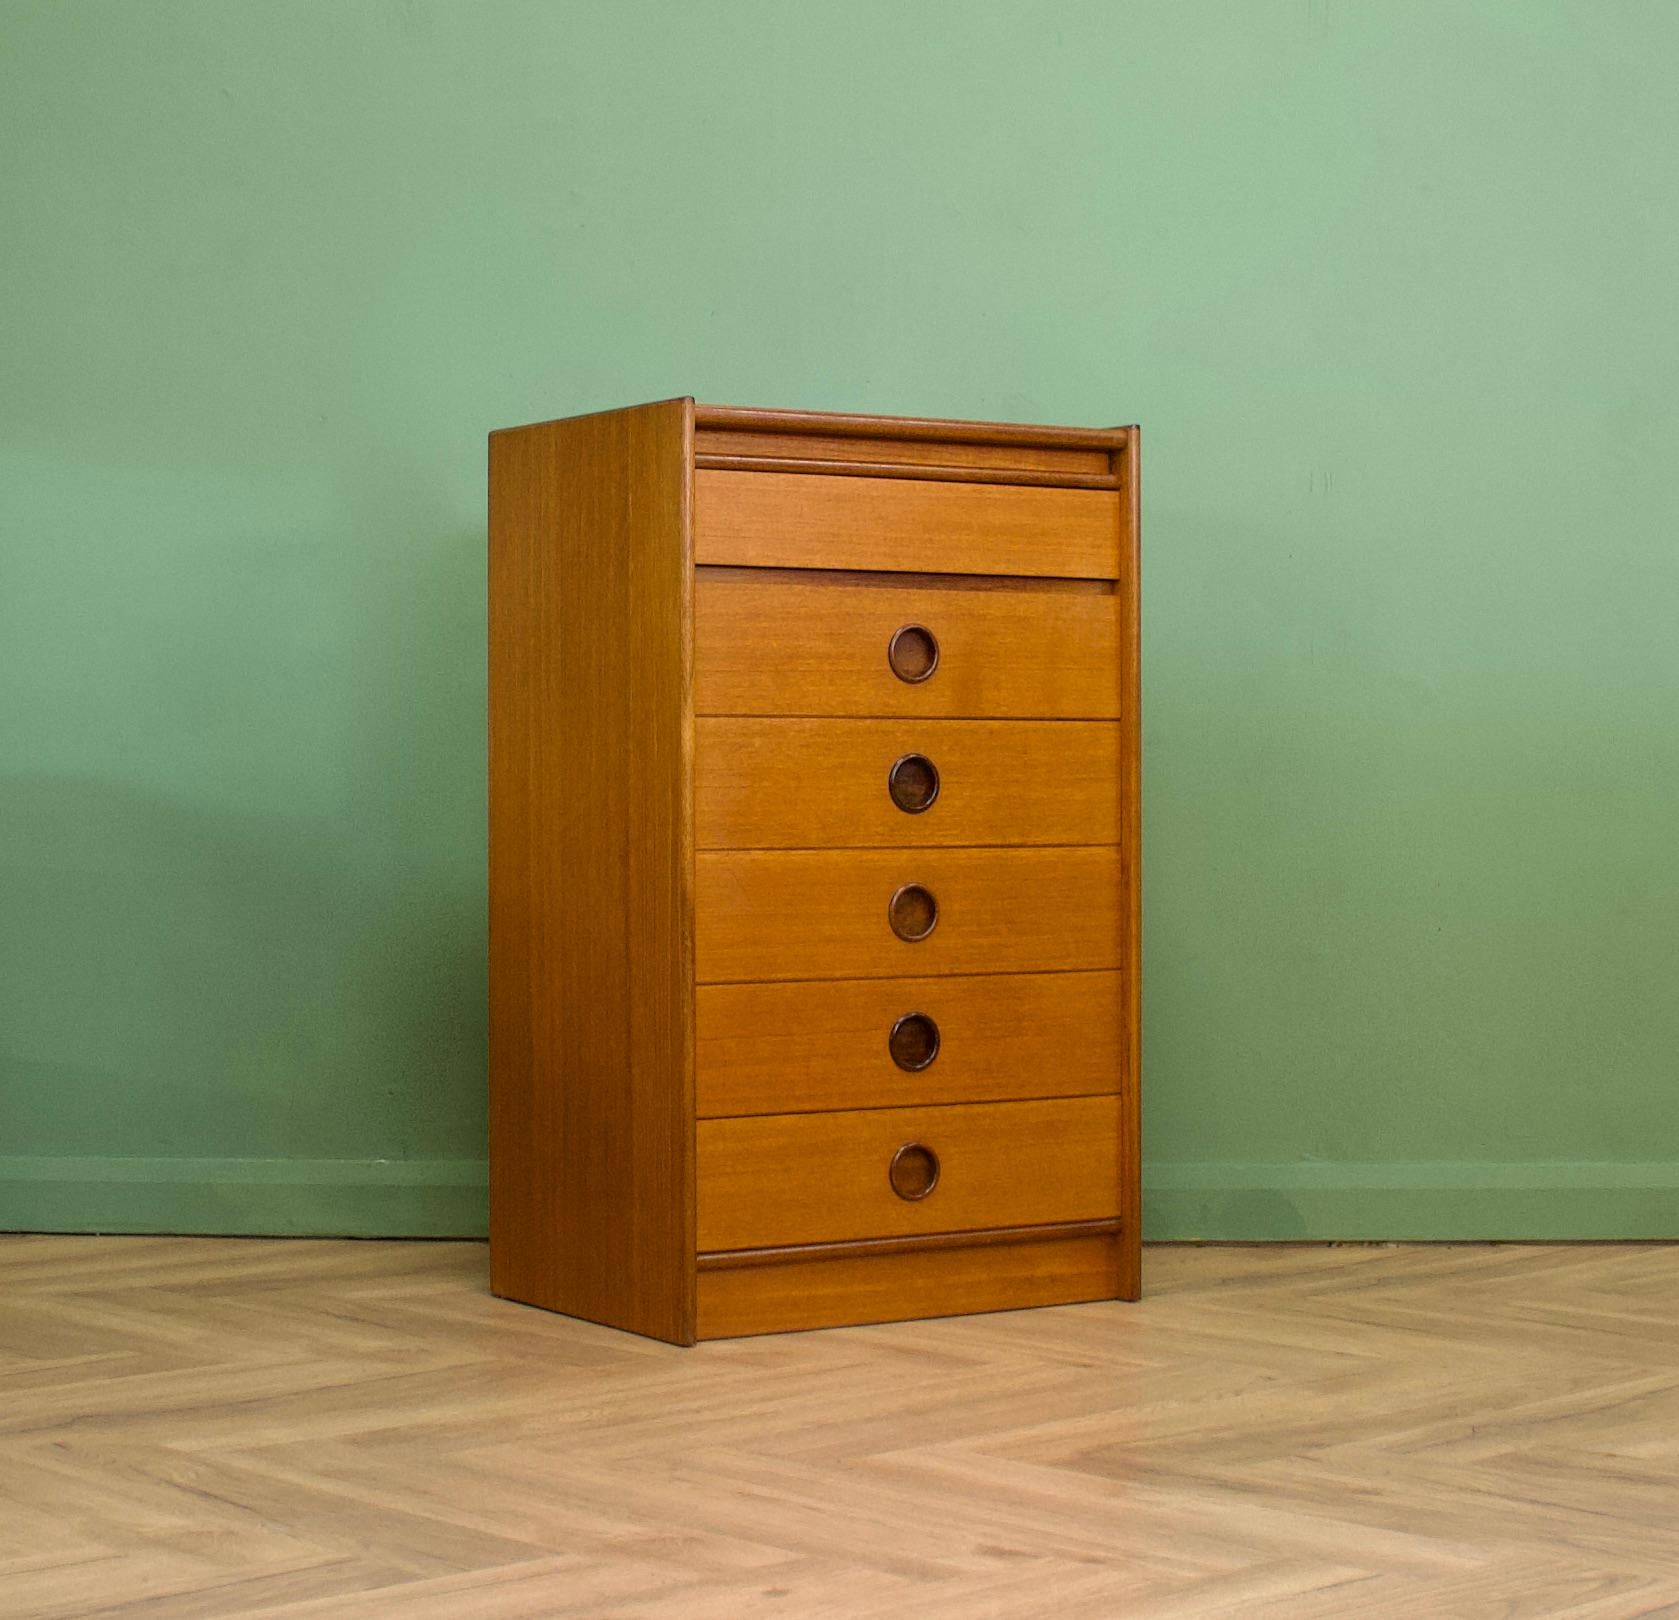 A mid century walnut tallboy chest of drawers from the quality furniture makers, Bath Cabinet Makers
There are six drawers in total - each having a recessed, solid teak, round handle